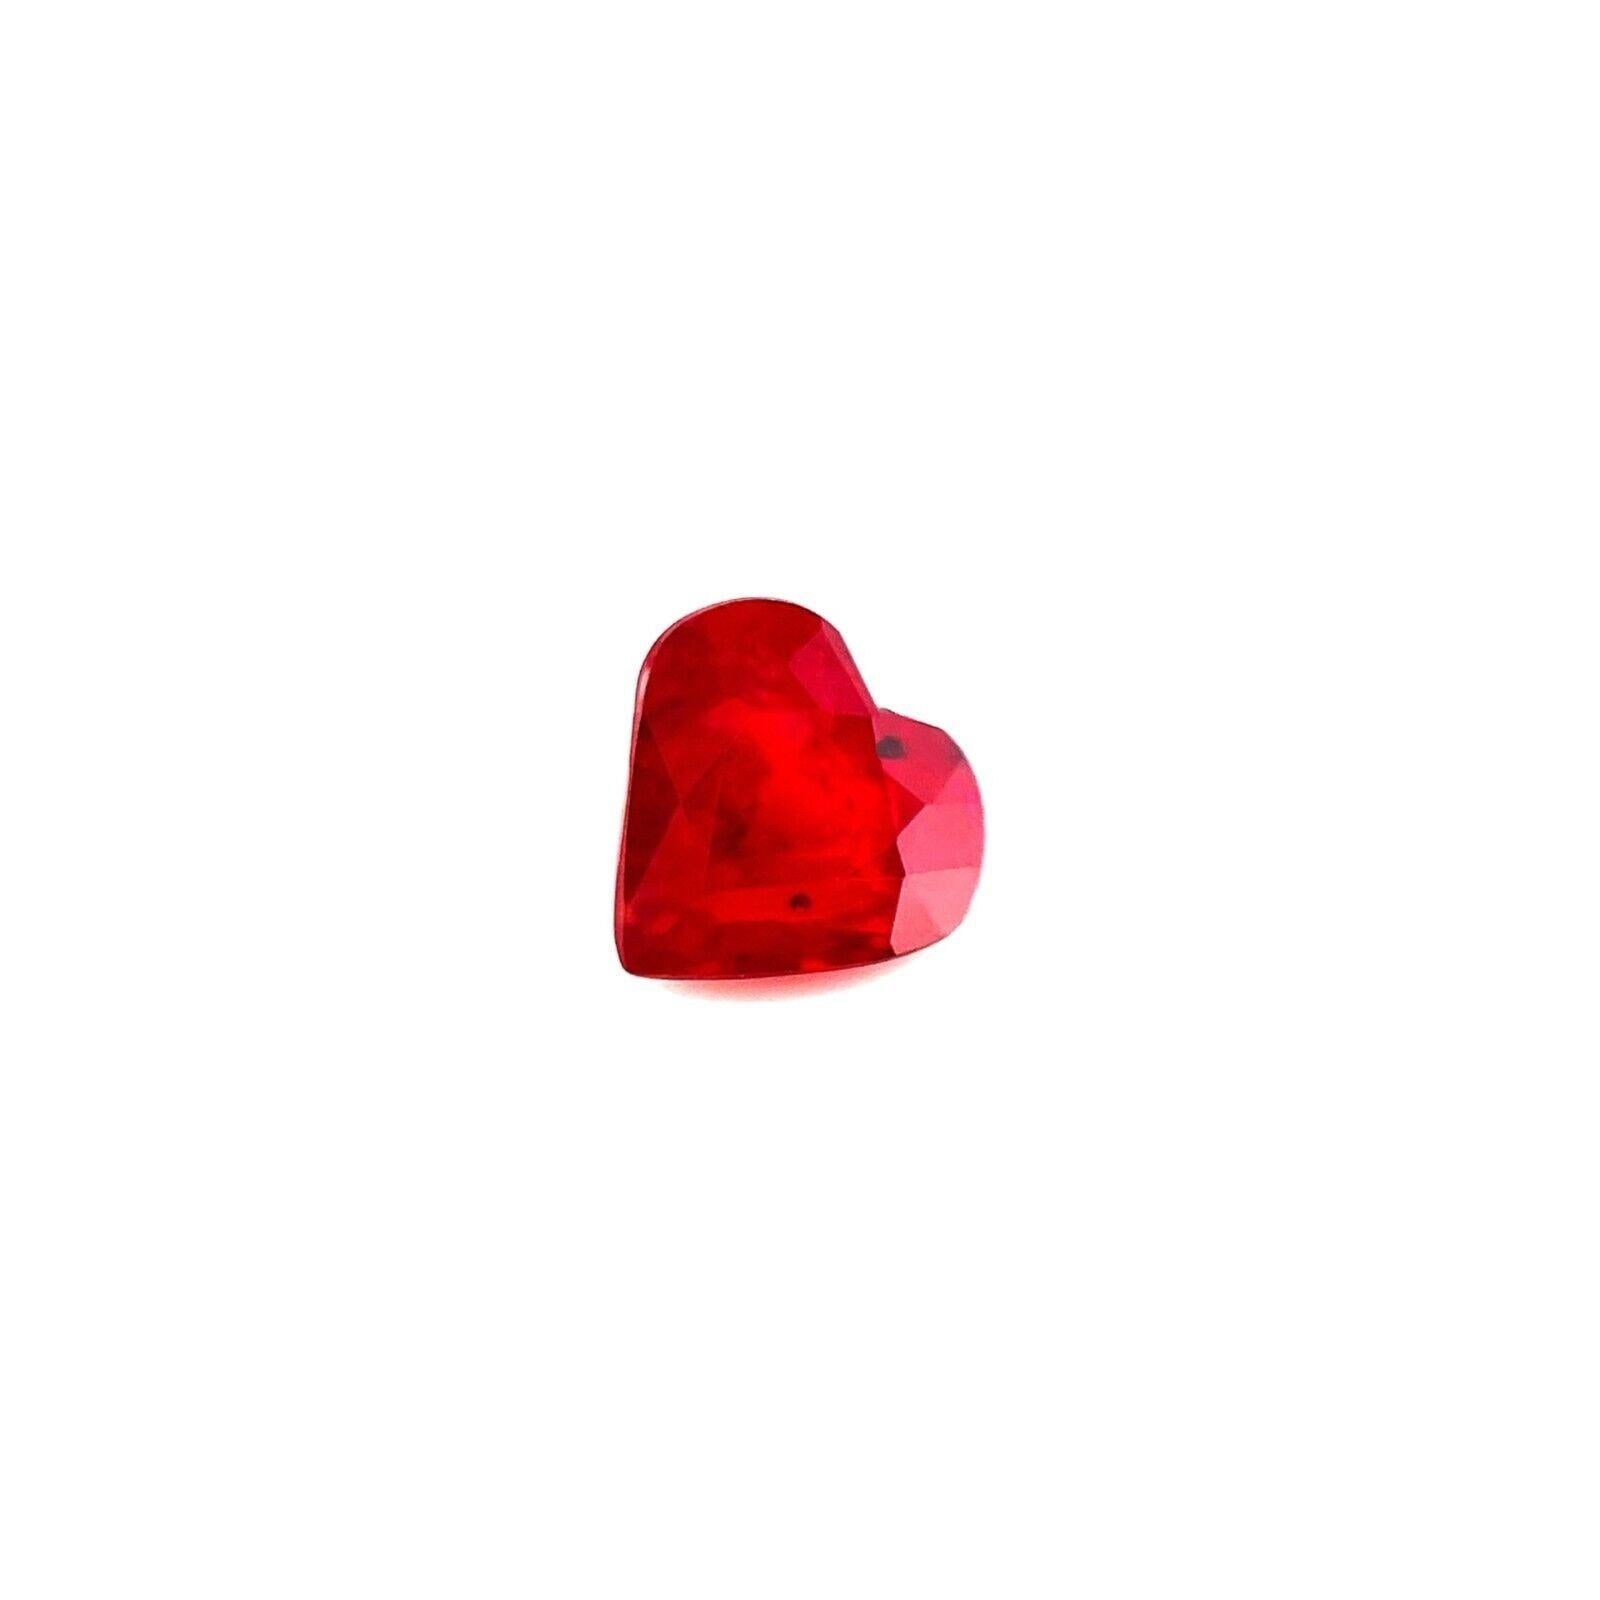 Natural 1.16Ct Deep Red Ruby Heart Cut Loose Rare Gemstone 6.5x6mm

Fine Natural Deep Red Heart Cut Ruby.
1.16 Carat with an excellent heart cut and beautiful deep 'cherry' red colour.
The clarity on this stone is good, a clean stone with only some